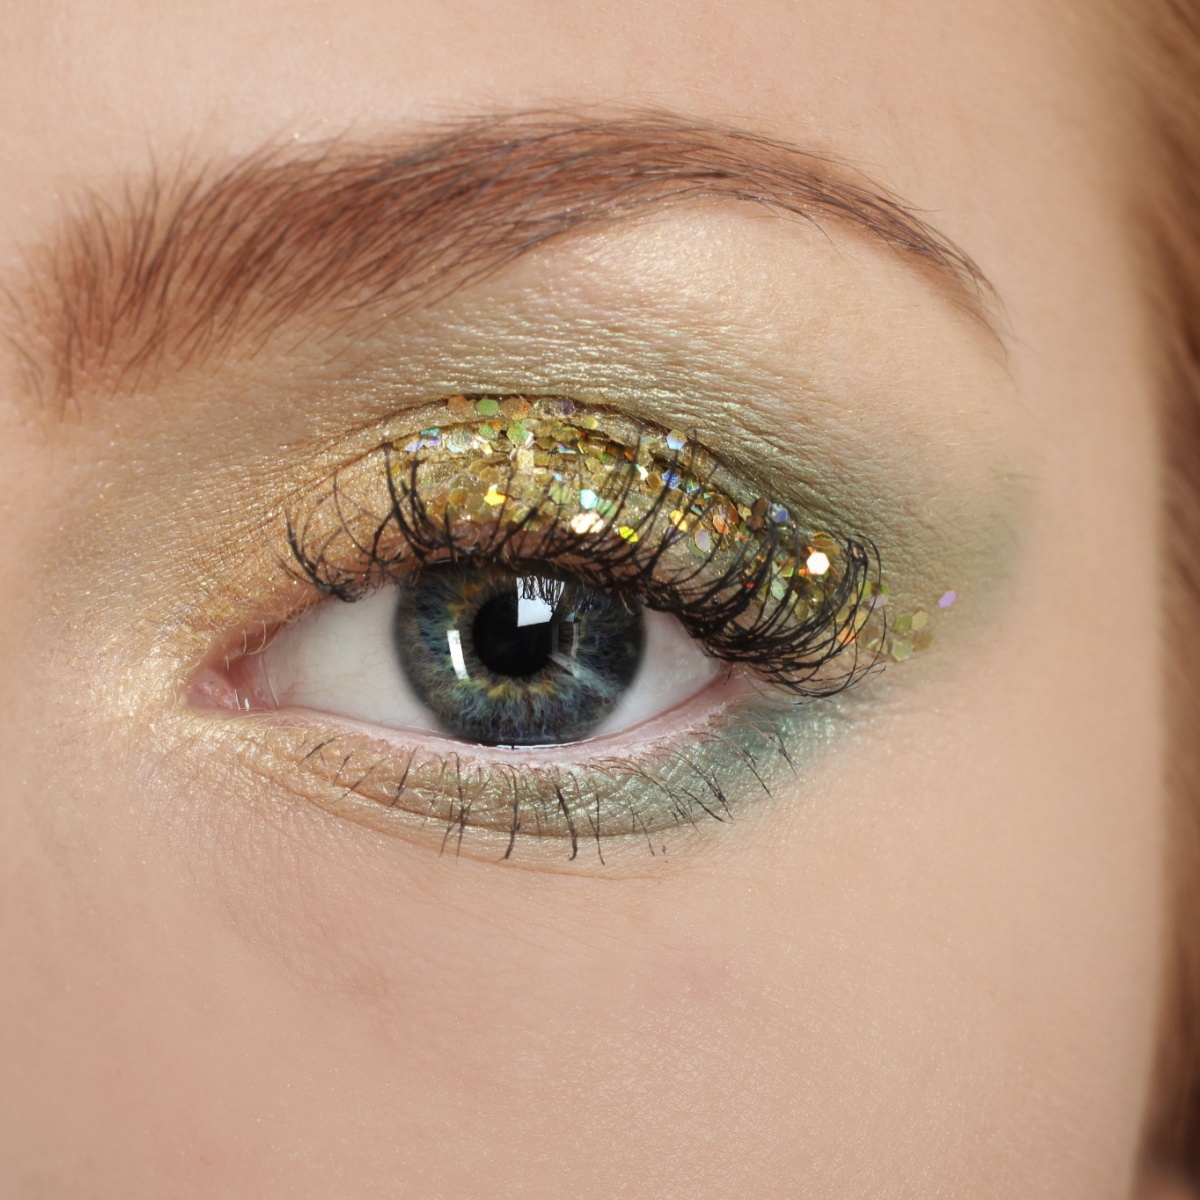 How glitter eye makeup can look incredible on mature women